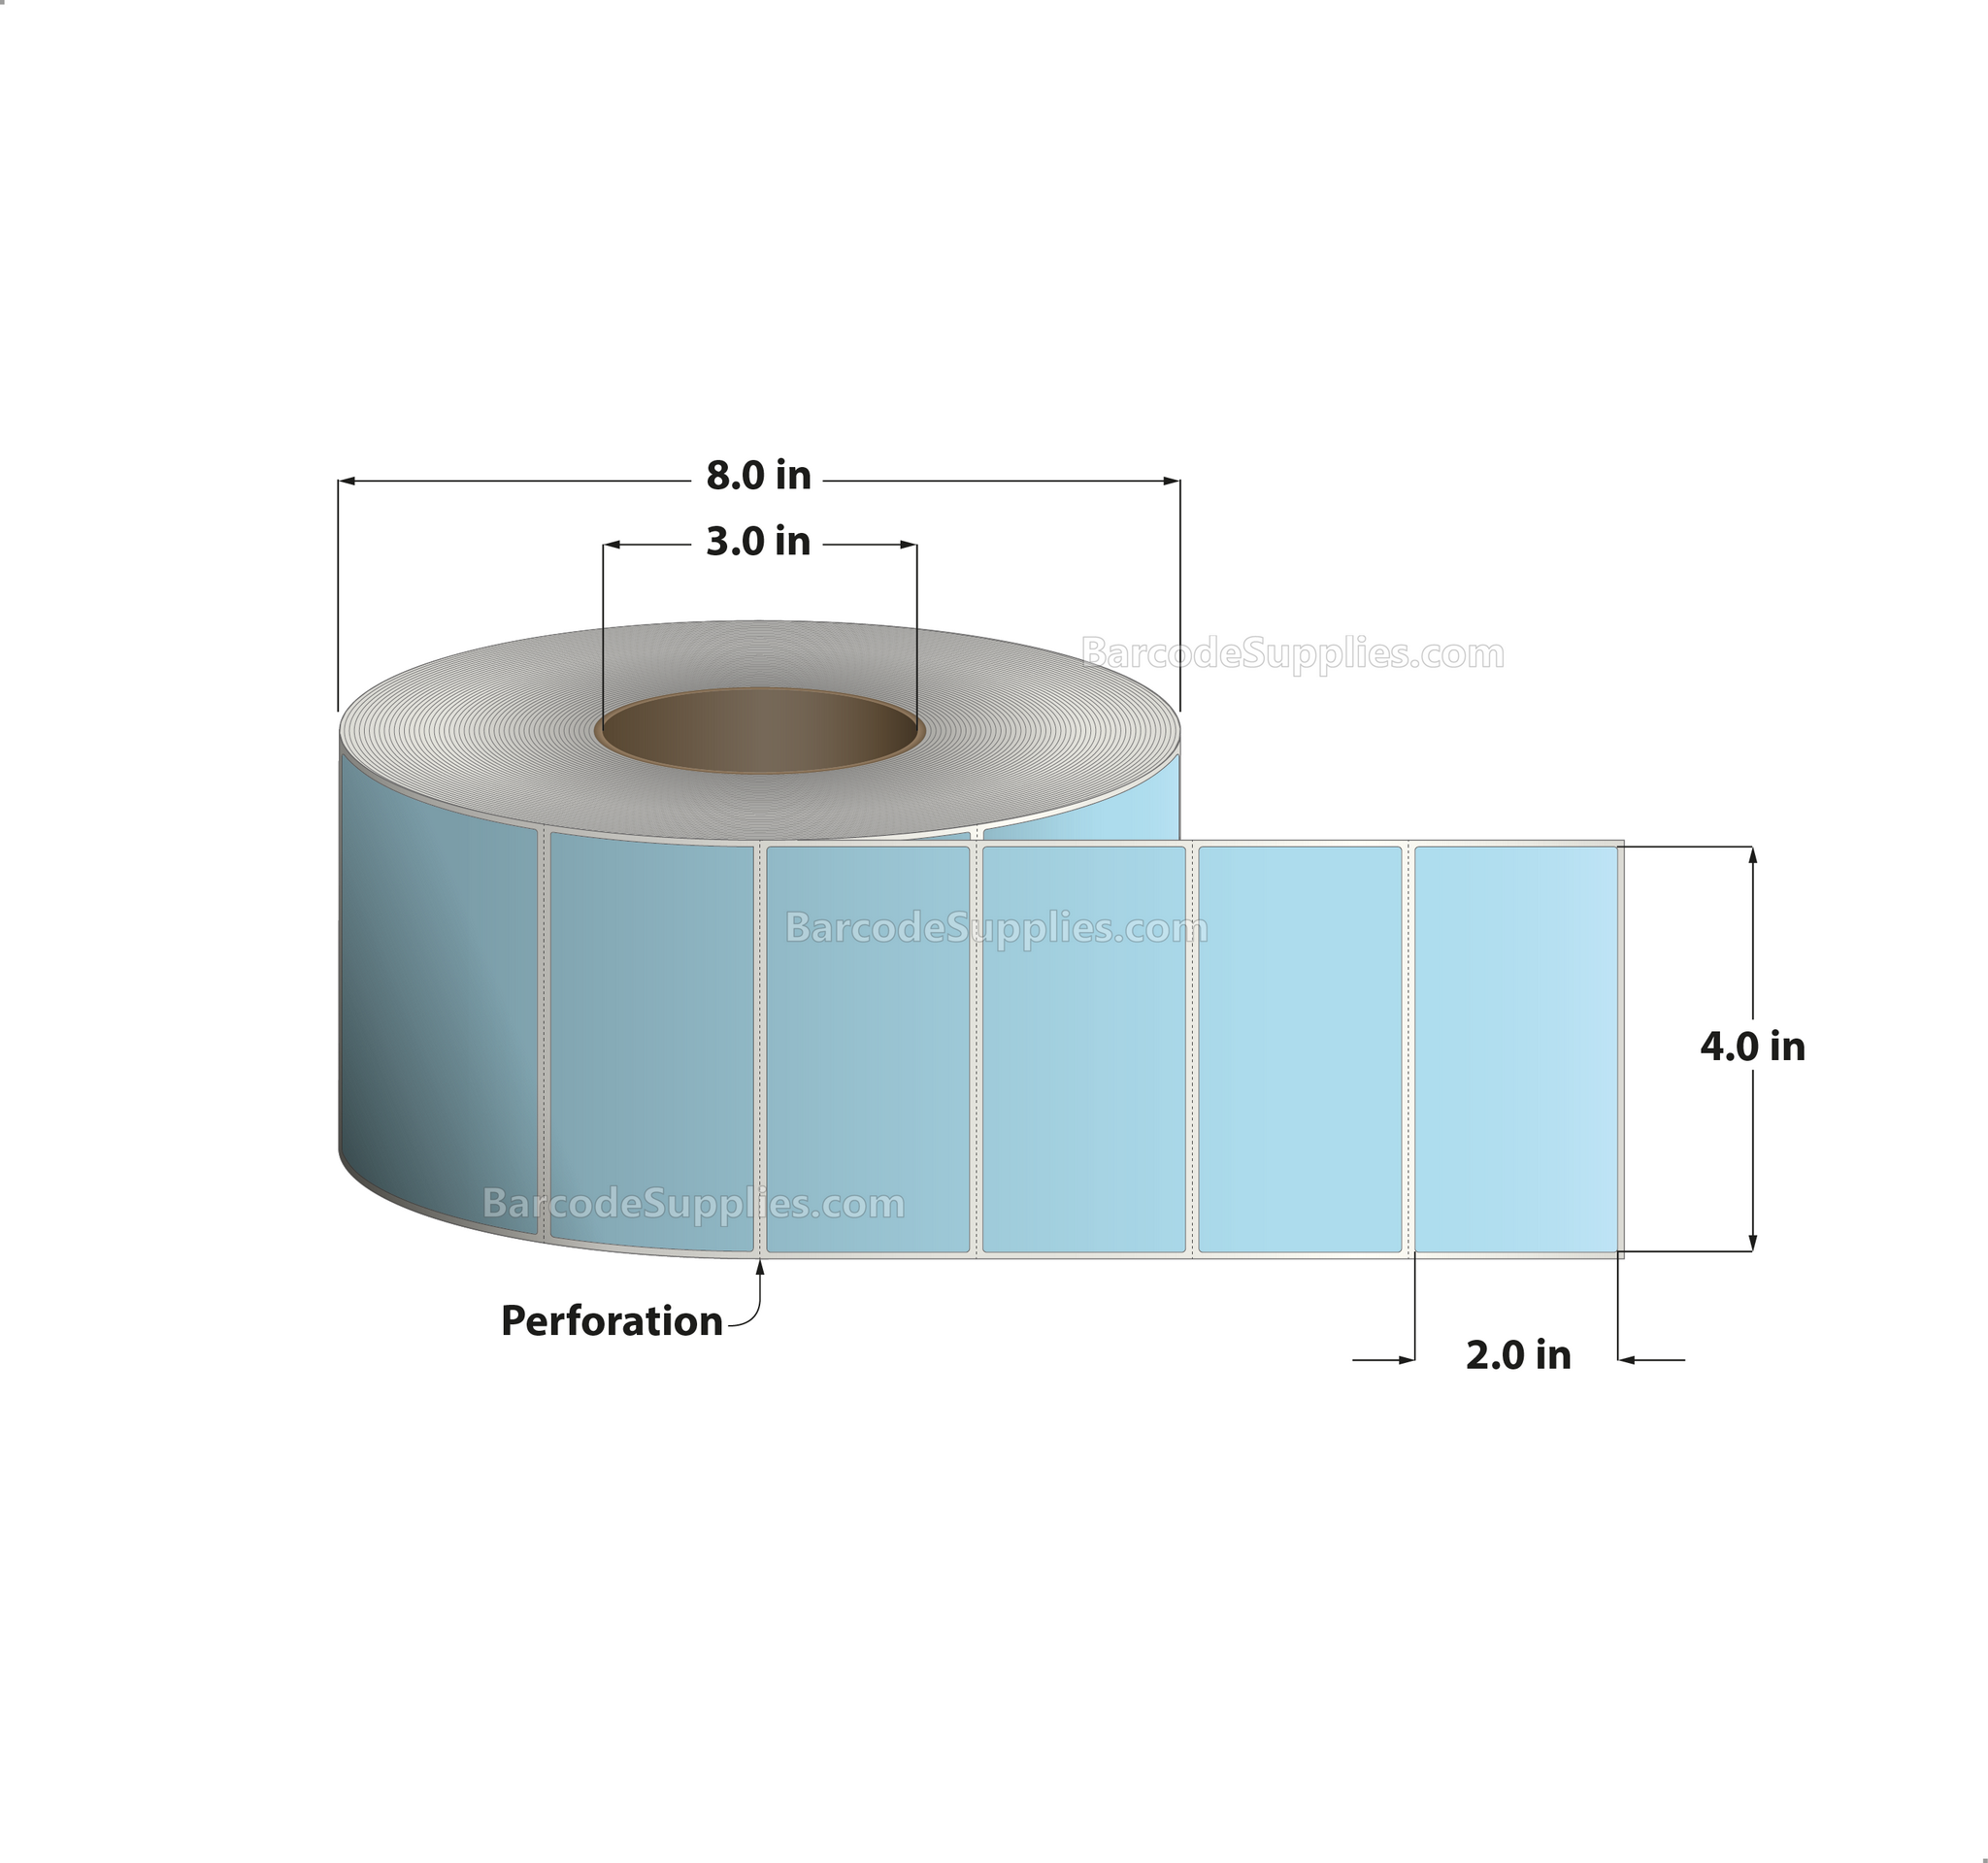 4 x 2 Thermal Transfer 290 Blue Labels With Permanent Adhesive - Perforated - 2900 Labels Per Roll - Carton Of 4 Rolls - 11600 Labels Total - MPN: RFC-4-2-2900-BL